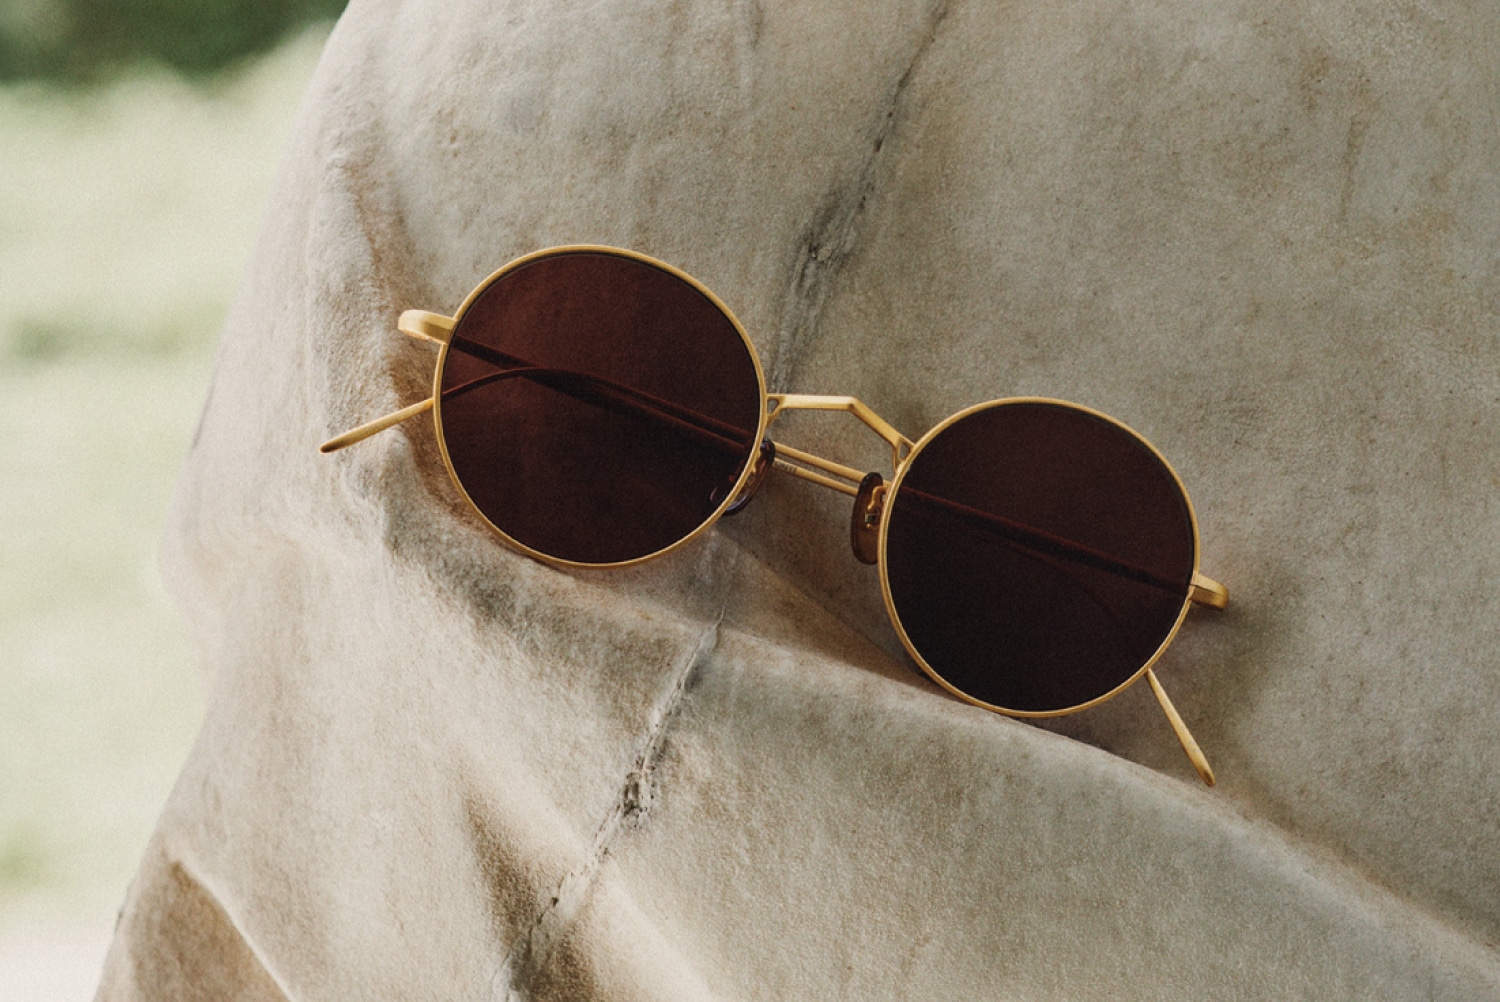 Oliver Peoples & Gio Ponti collaboration campaign | OP Stories